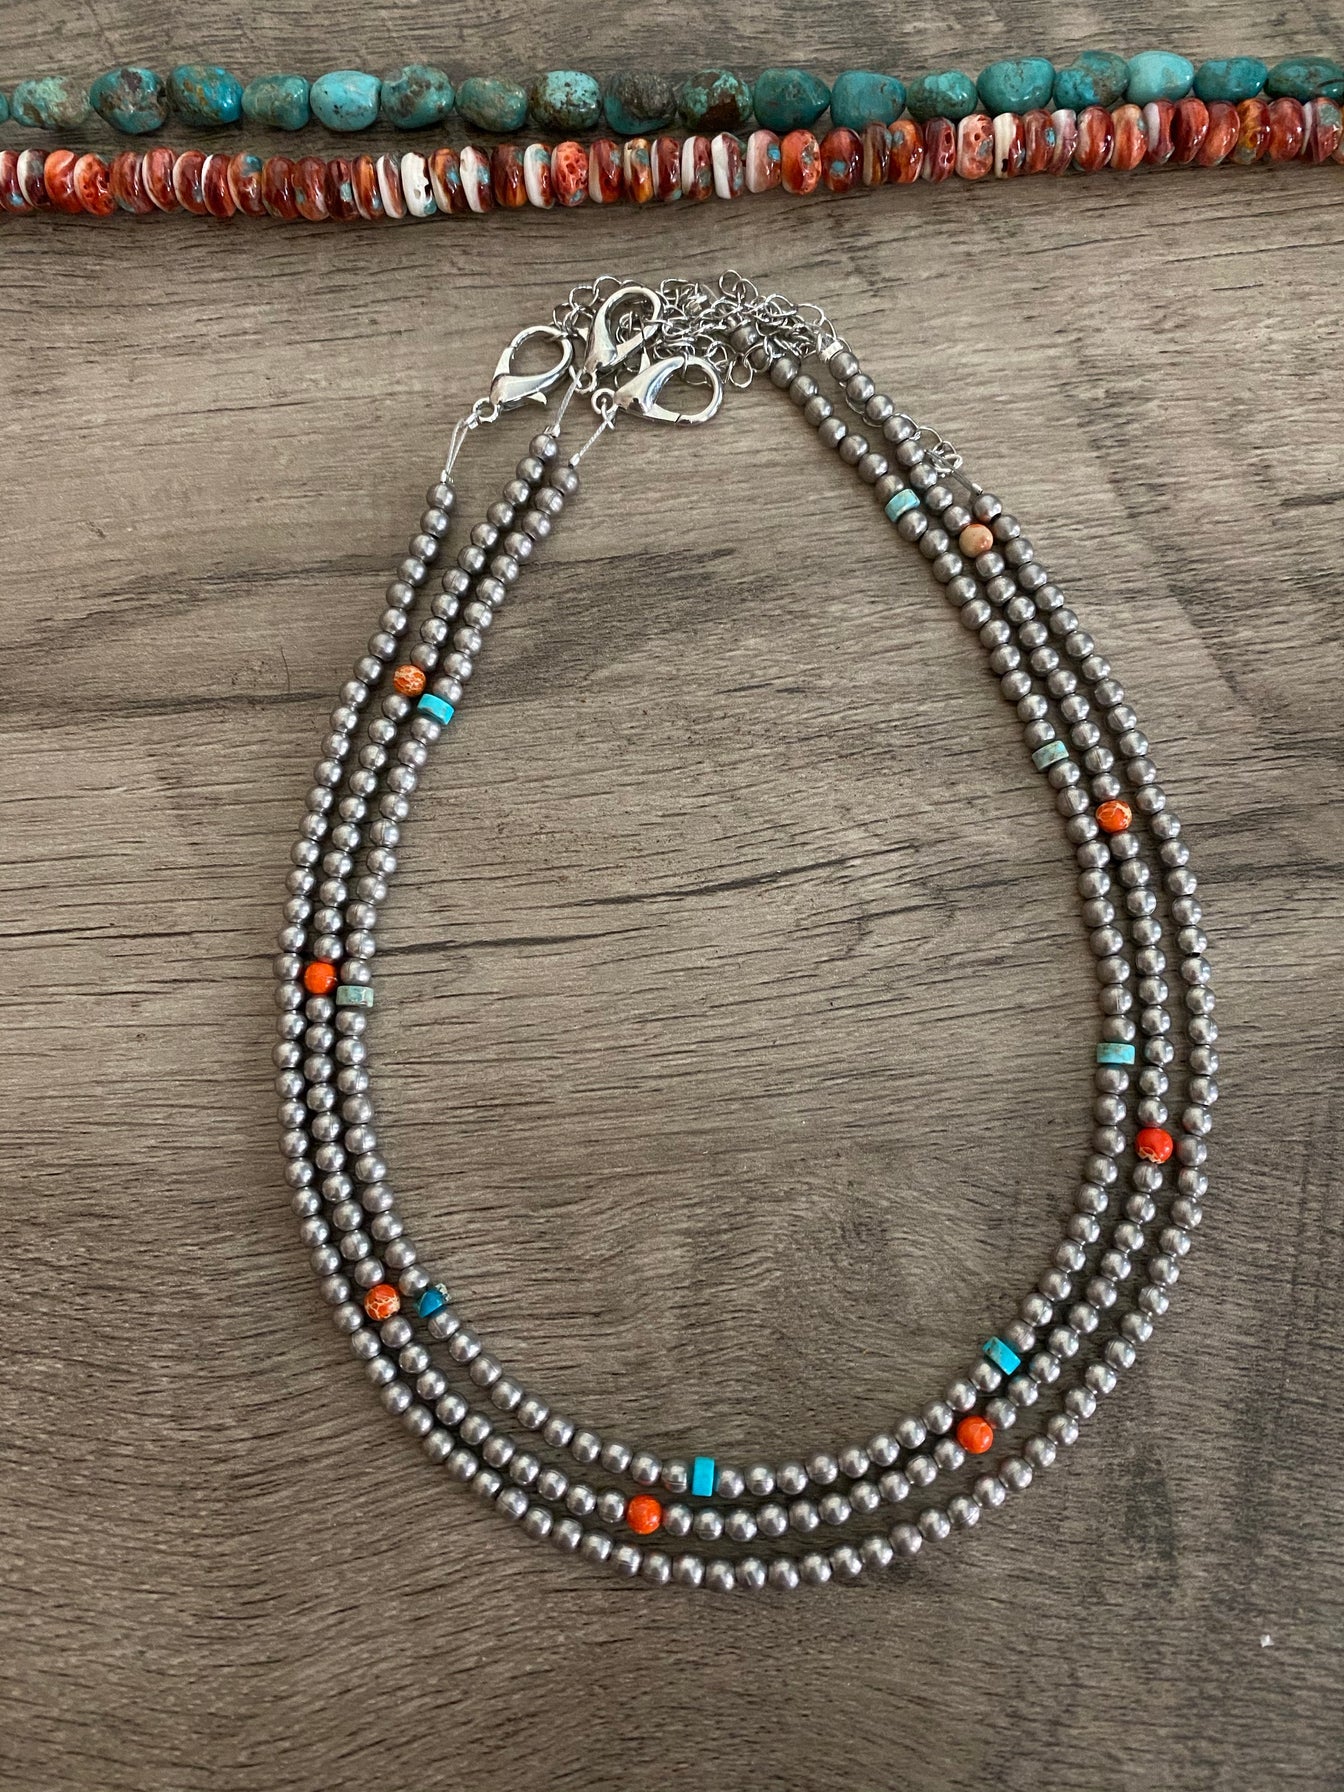 4 mm silver plated and composite turquoise